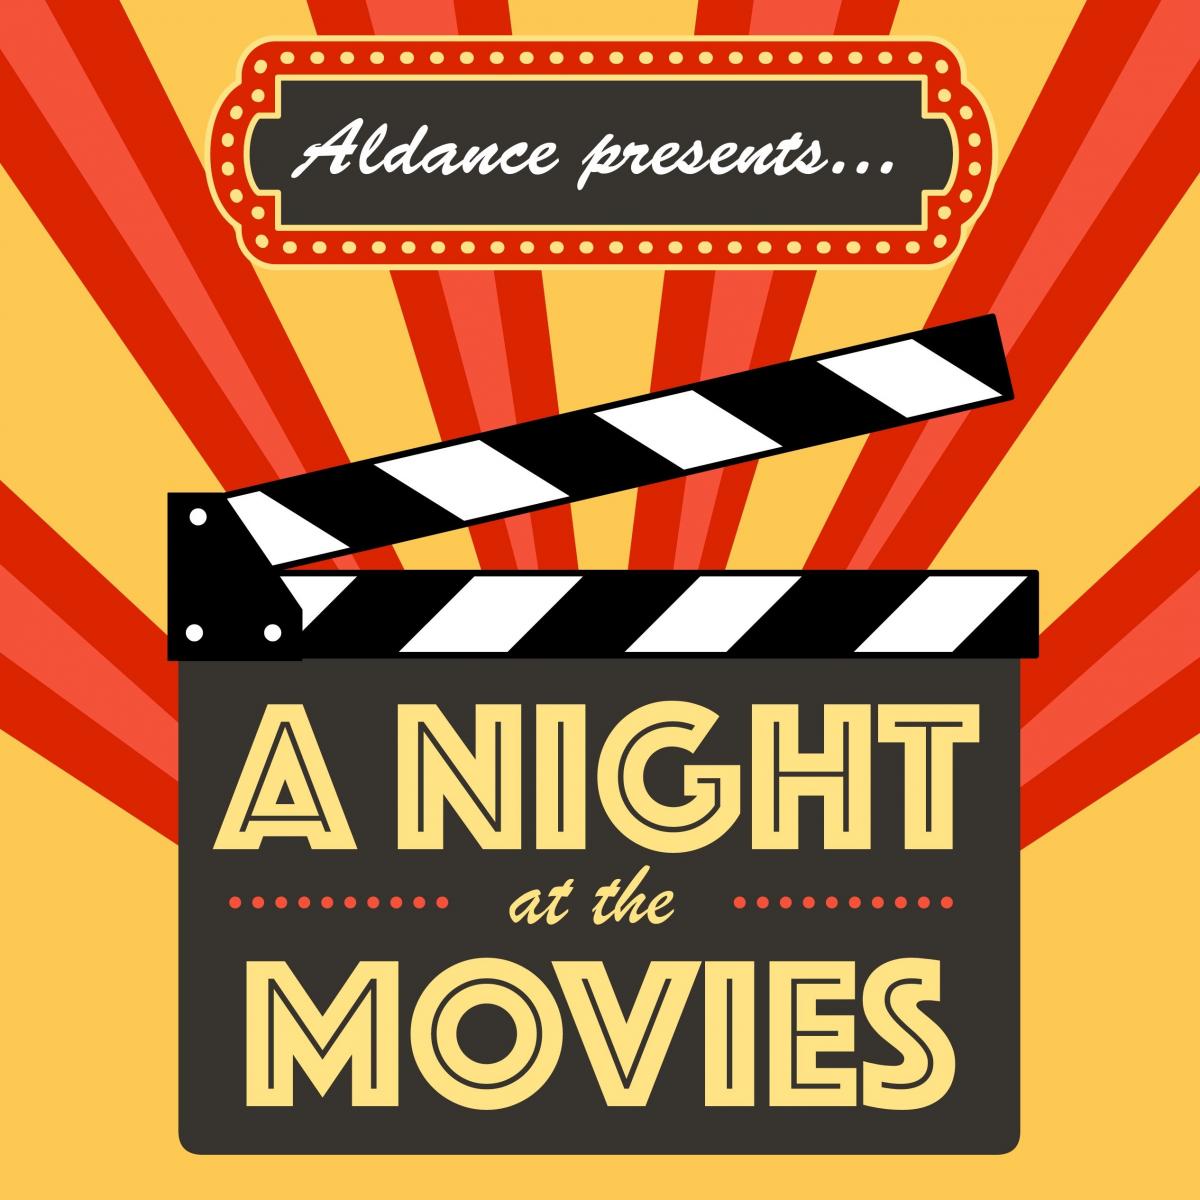 Aldance: A Night at the Movies at Camberley Theatre